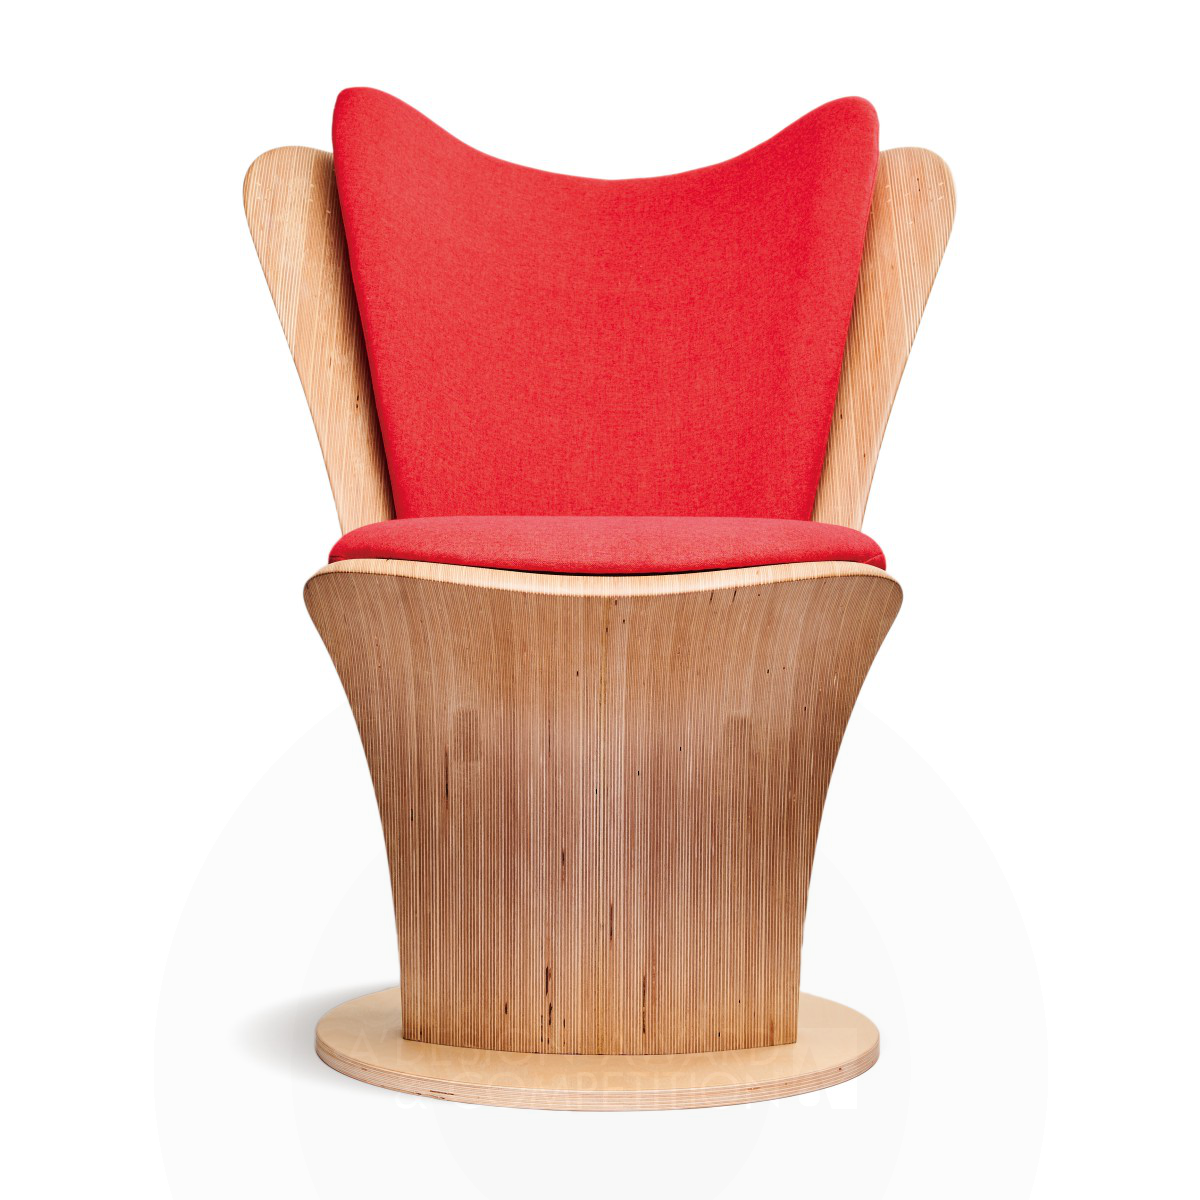 Yu-Cheng Wu wins Iron at the prestigious A' Furniture Design Award with Blume Lounge Chair.